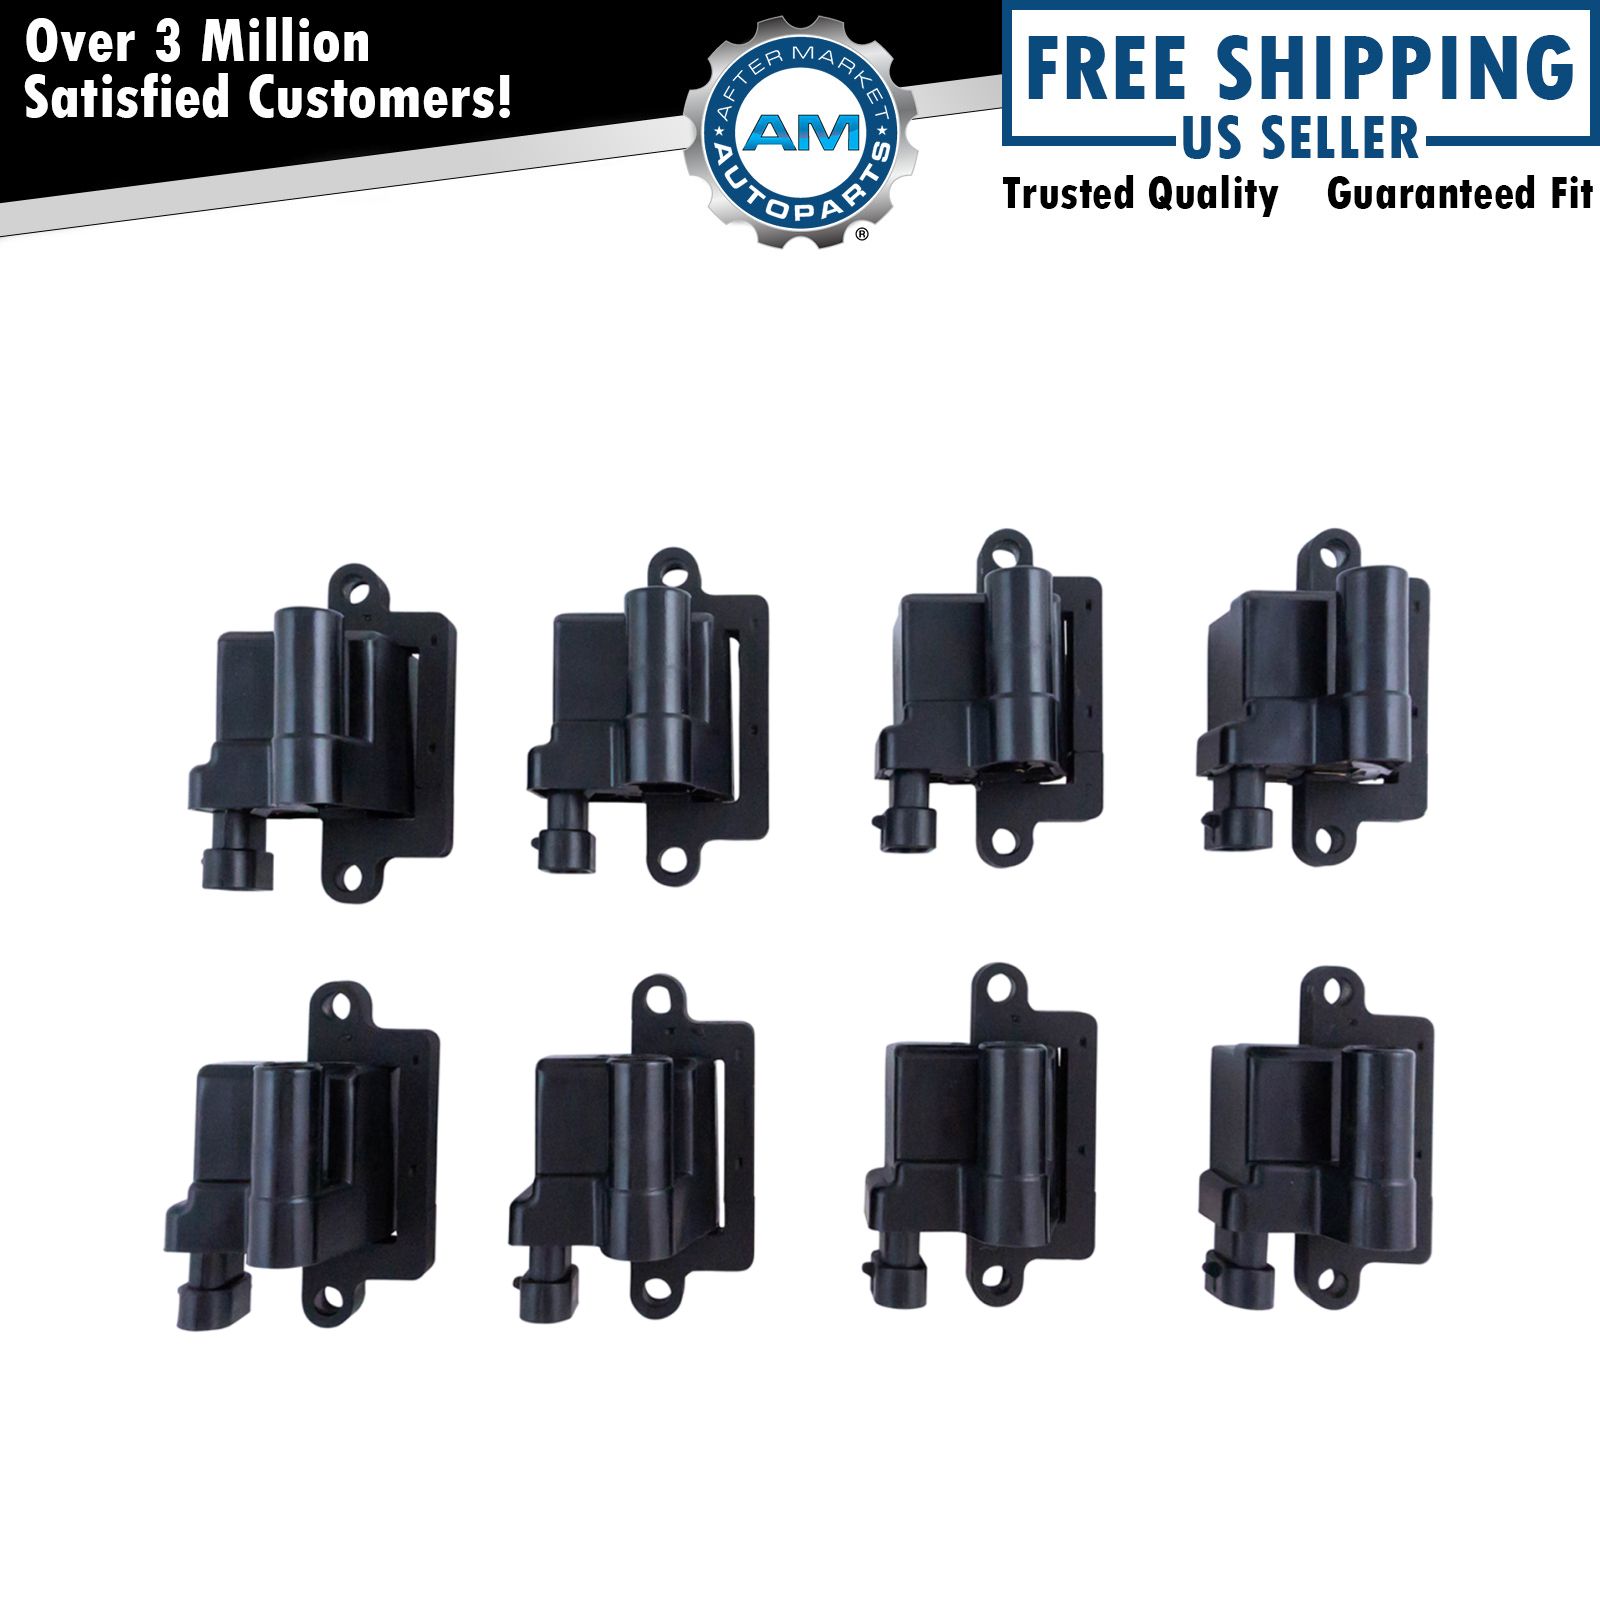 Square Ignition Coil Pack Kit Set of 8 For Chevy Silverado GMC Pickup Truck V8